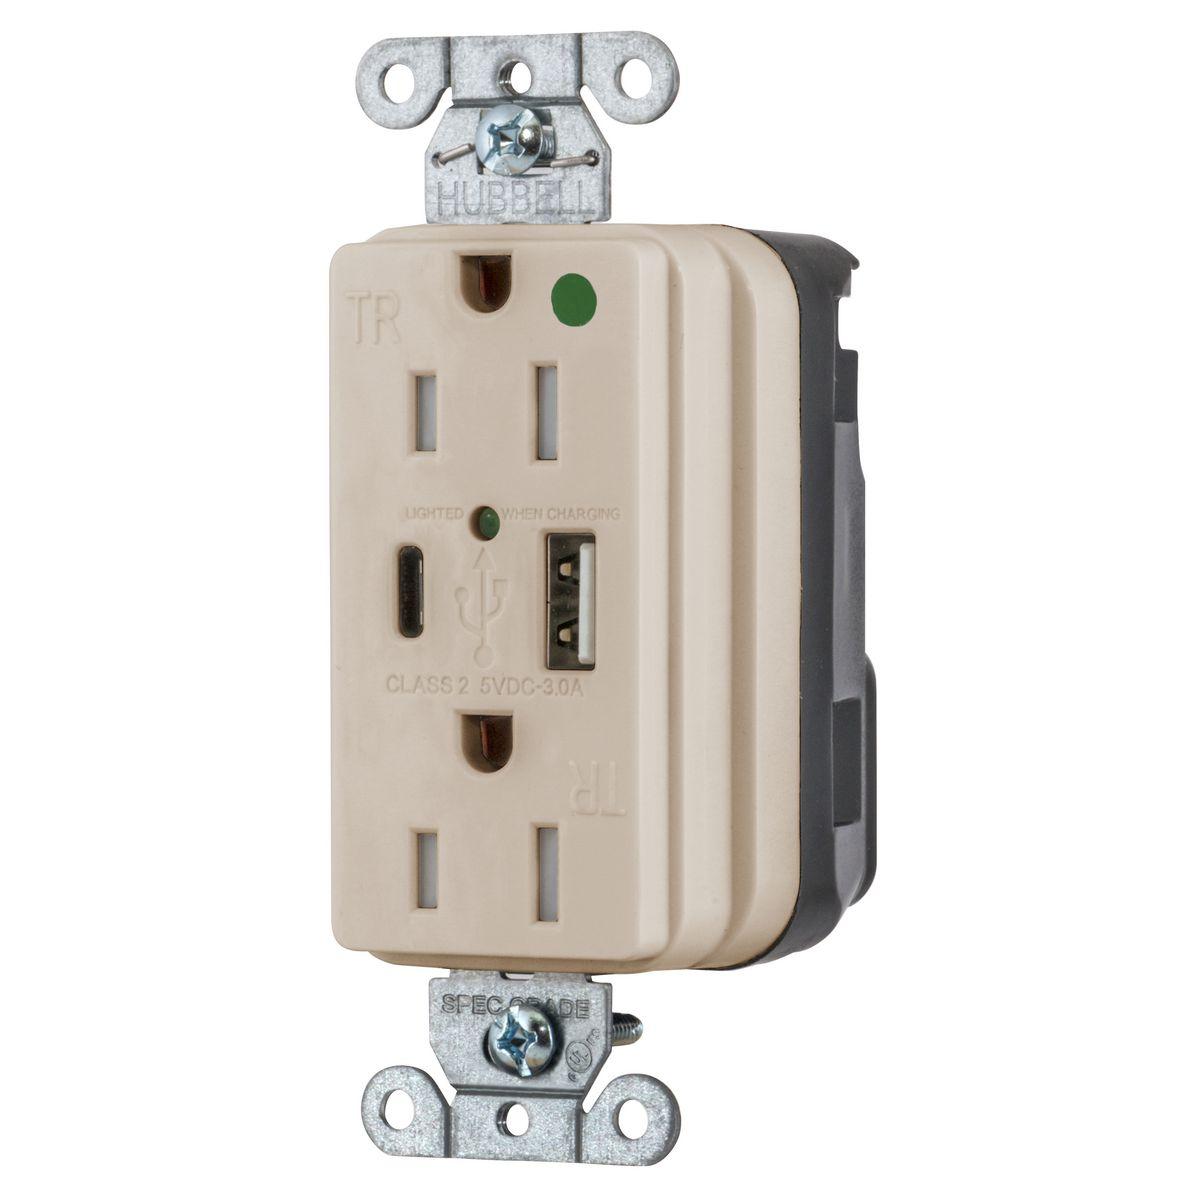 Hubbell SNAP8200UACLA Hubbell Wiring Device Kellems, Straight Blade Devices, SNAP-ConnectDecorator Duplex, USB Charger Receptacle, Hospital Grade, 15A 125V, 2-Pole 3-Wire Grounding, 5-15R, 5A "A" and "C" Charger Ports, Light Almond 